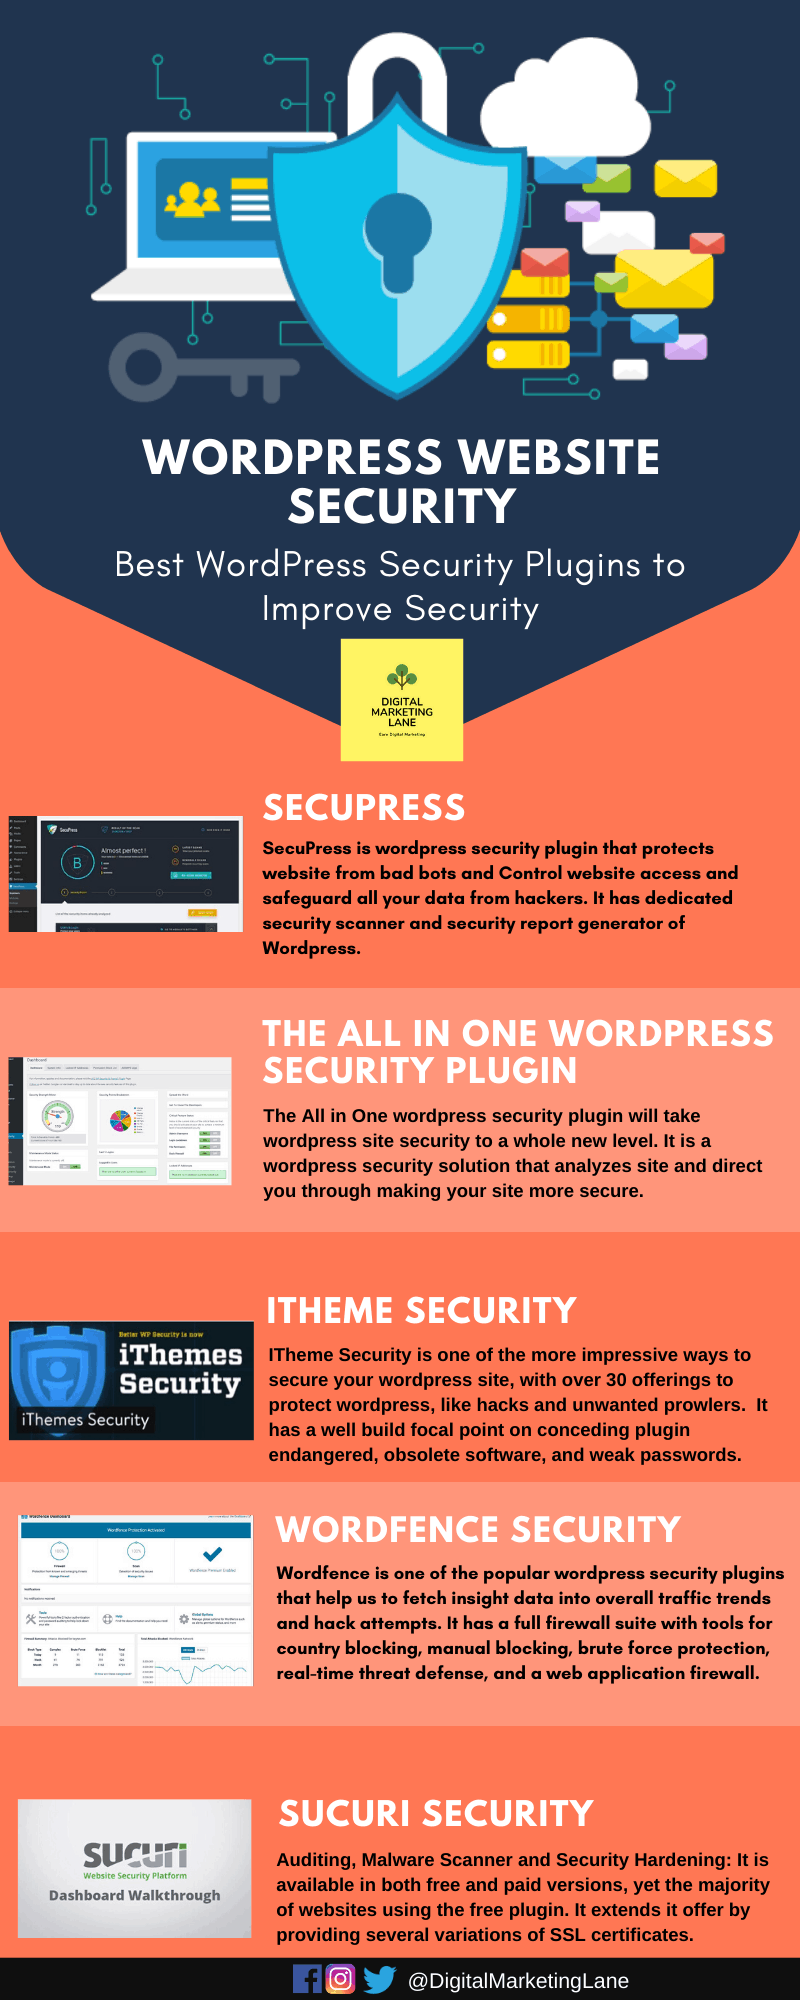 WordPress Security Plugins that monitors your website from hackers and prevents brute force attacks. They let you know if data has been compromised